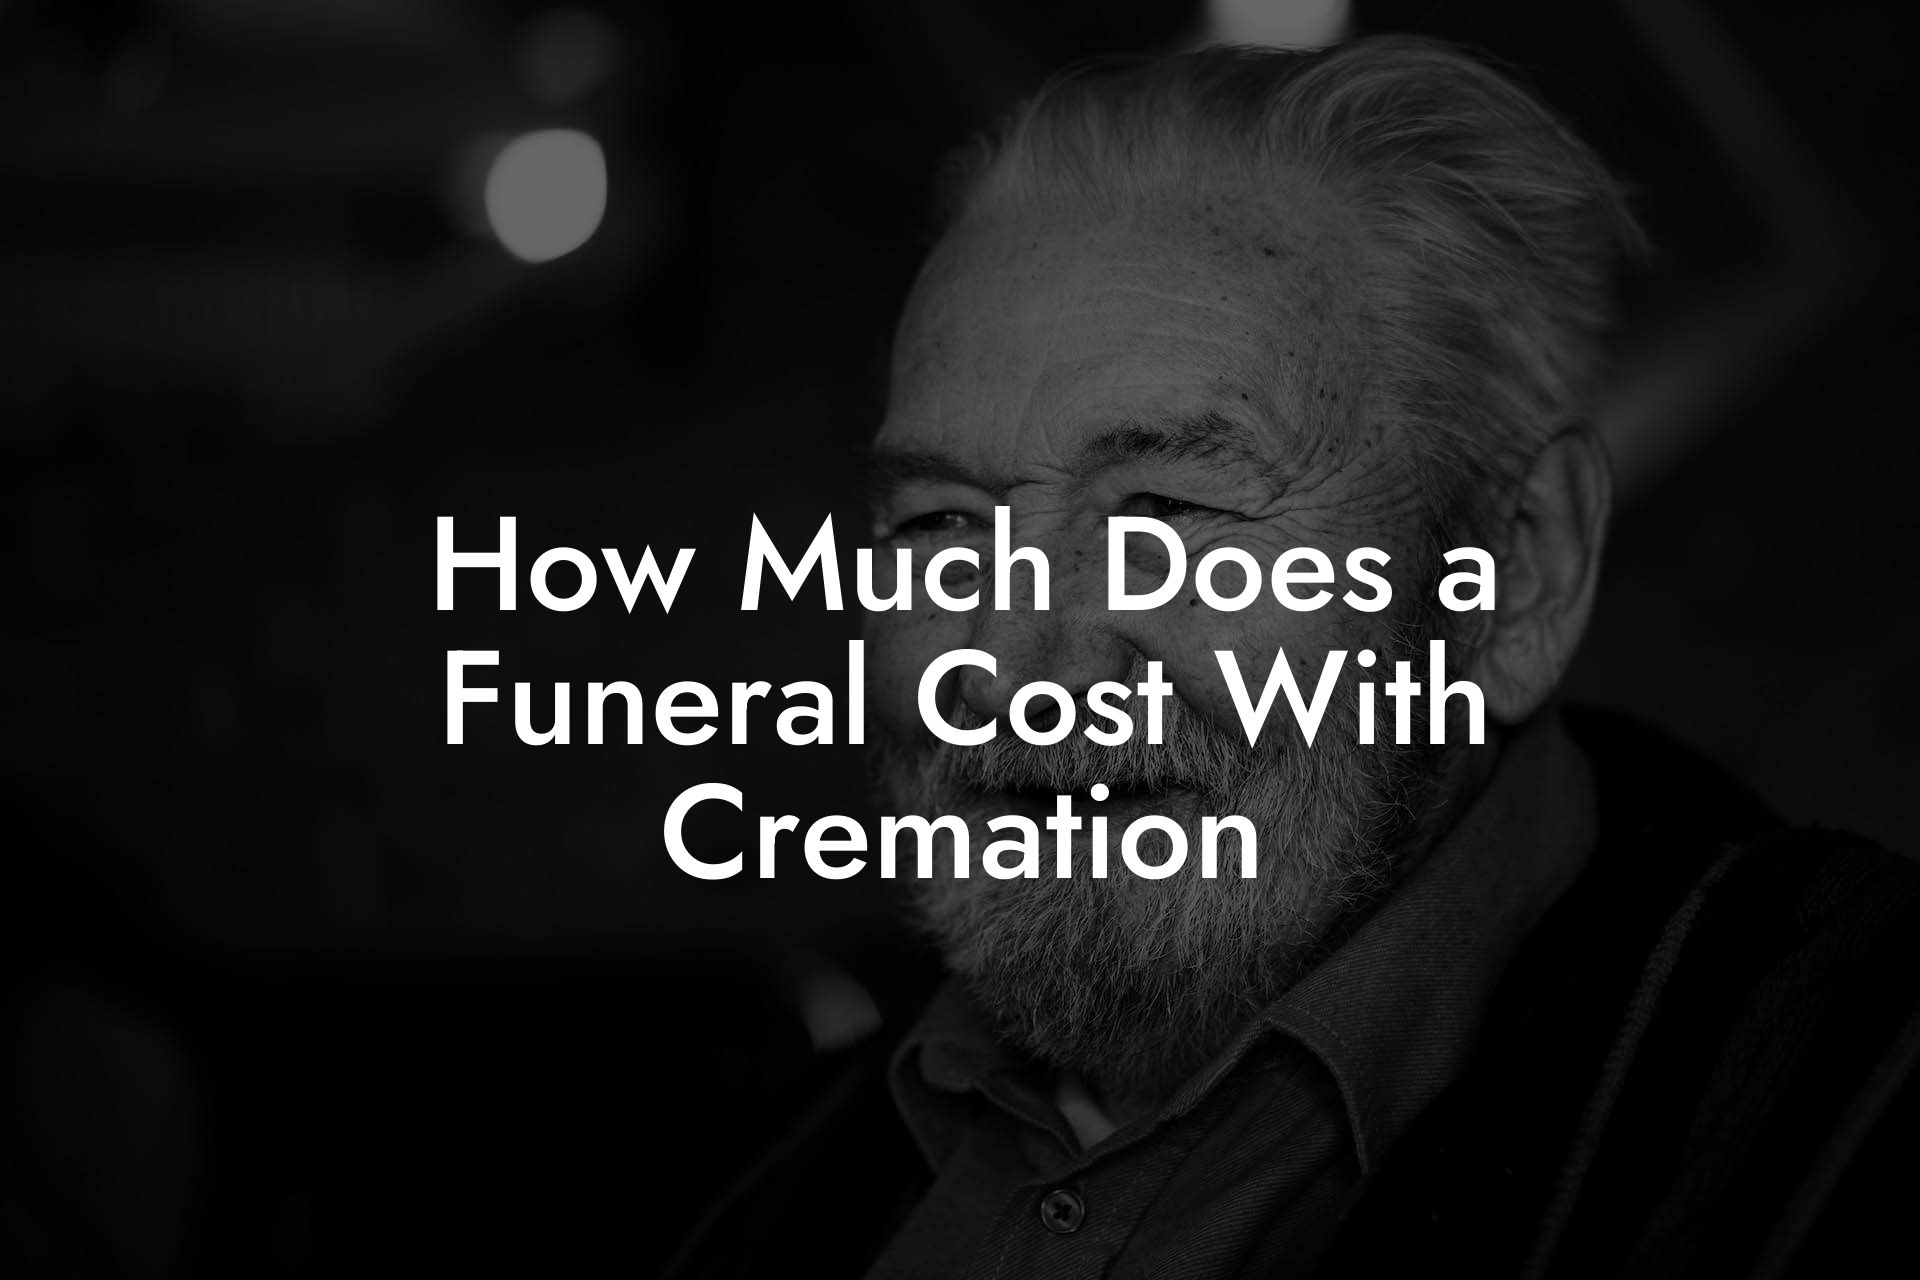 How Much Does a Funeral Cost With Cremation